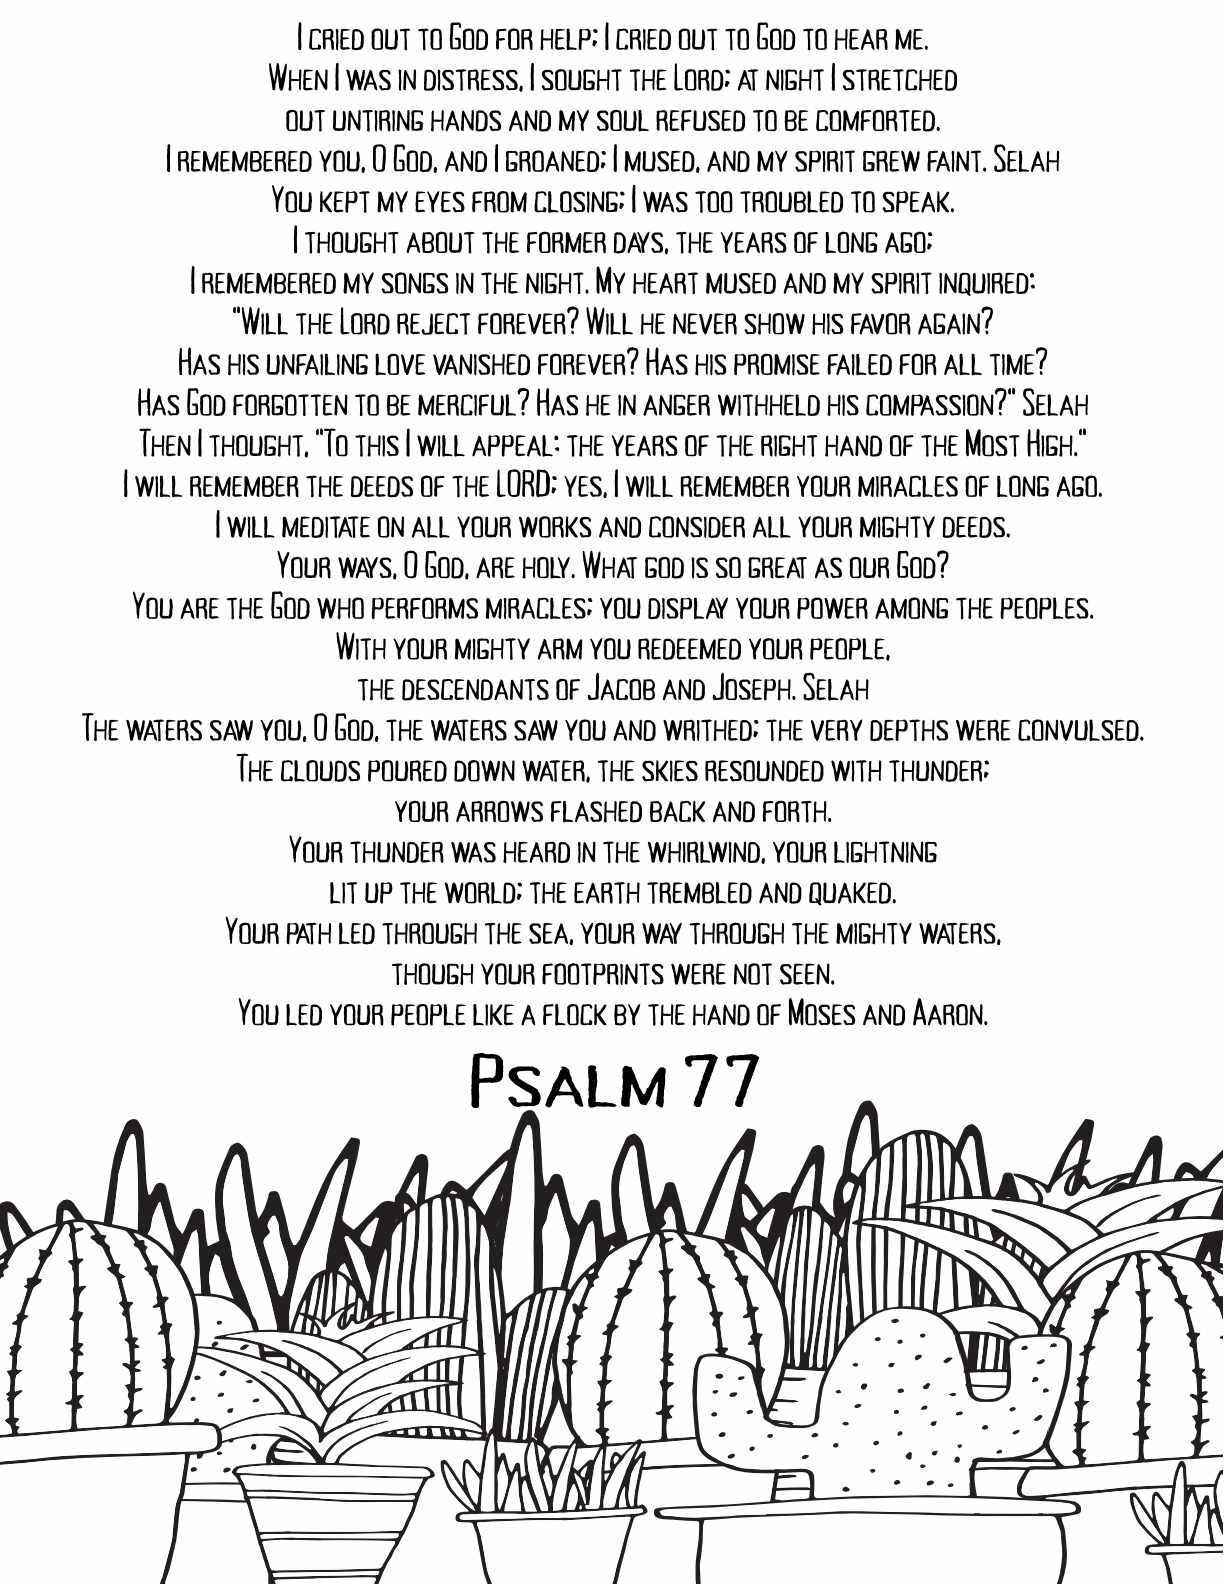 10 Free Printable Psalm Coloring Pages - Download and Color Adult Scripture - Psalm 77 CLICK HERE TO DOWNLOAD THIS PAGE FREE